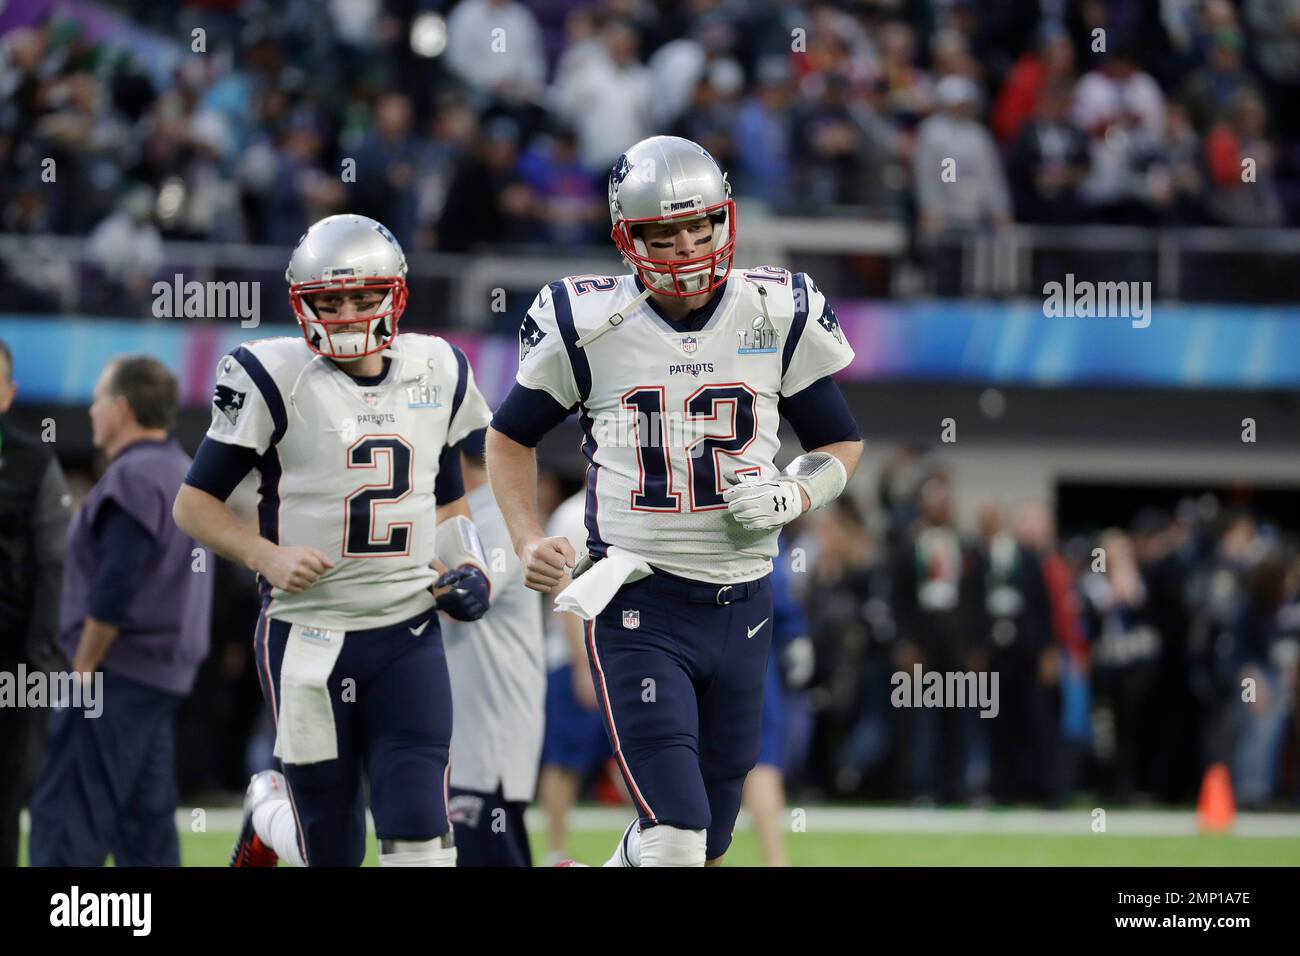 New England Patriots' Tom Brady (12) and Brian Hoyer (2) warm up before the  NFL Super